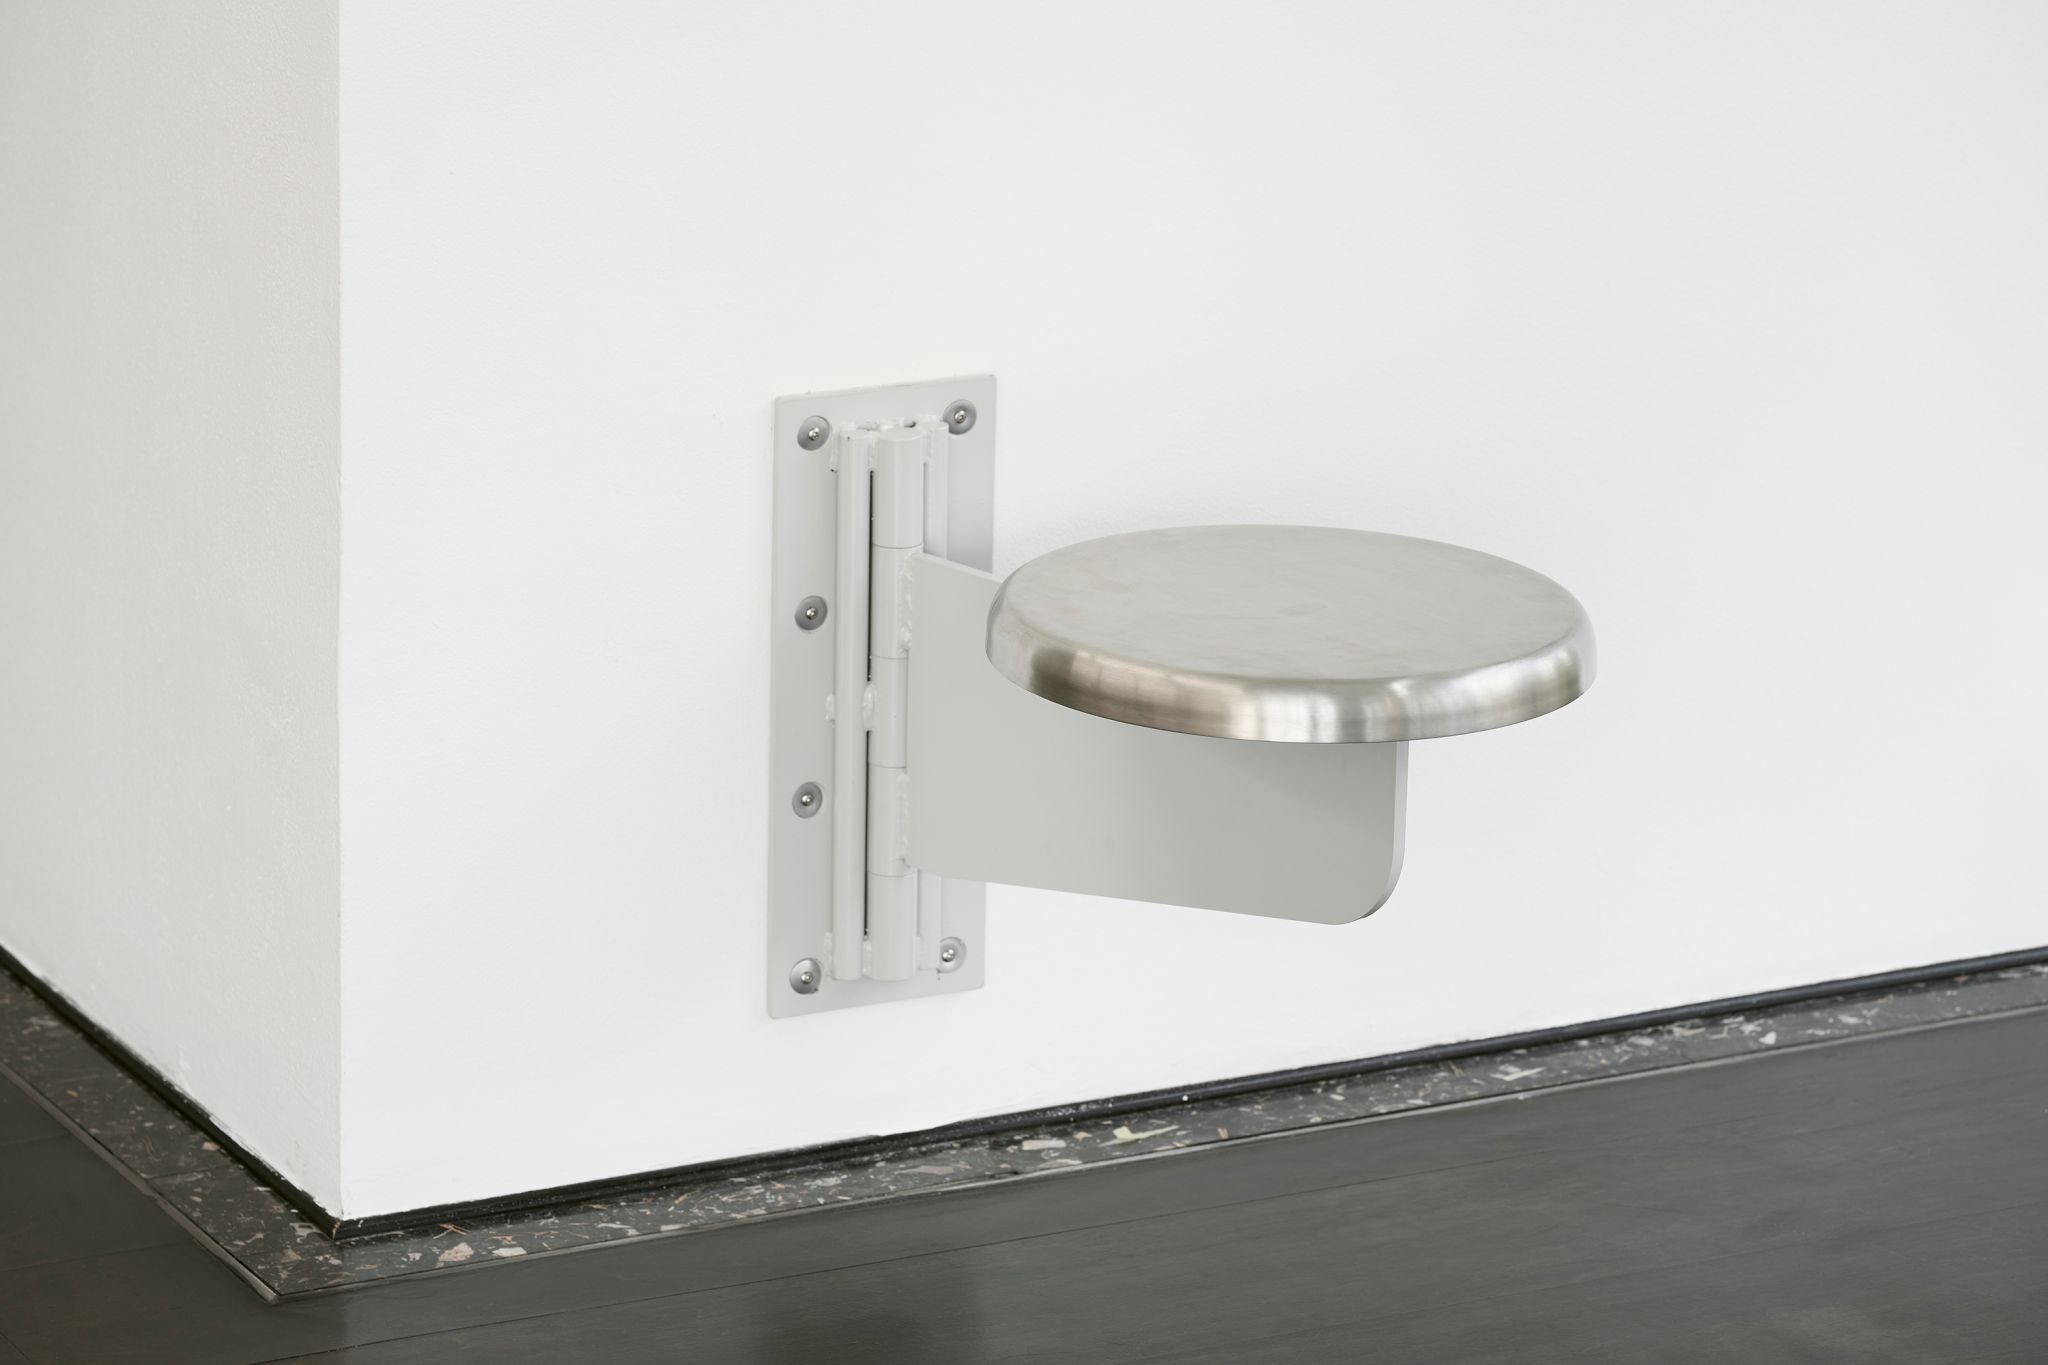 Sung Tieu, Untitled (In Cold Print), 2020, Wall mounted stainless steel stool, 47.5 ⁠× ⁠51 ⁠× ⁠36 ⁠⁠cm